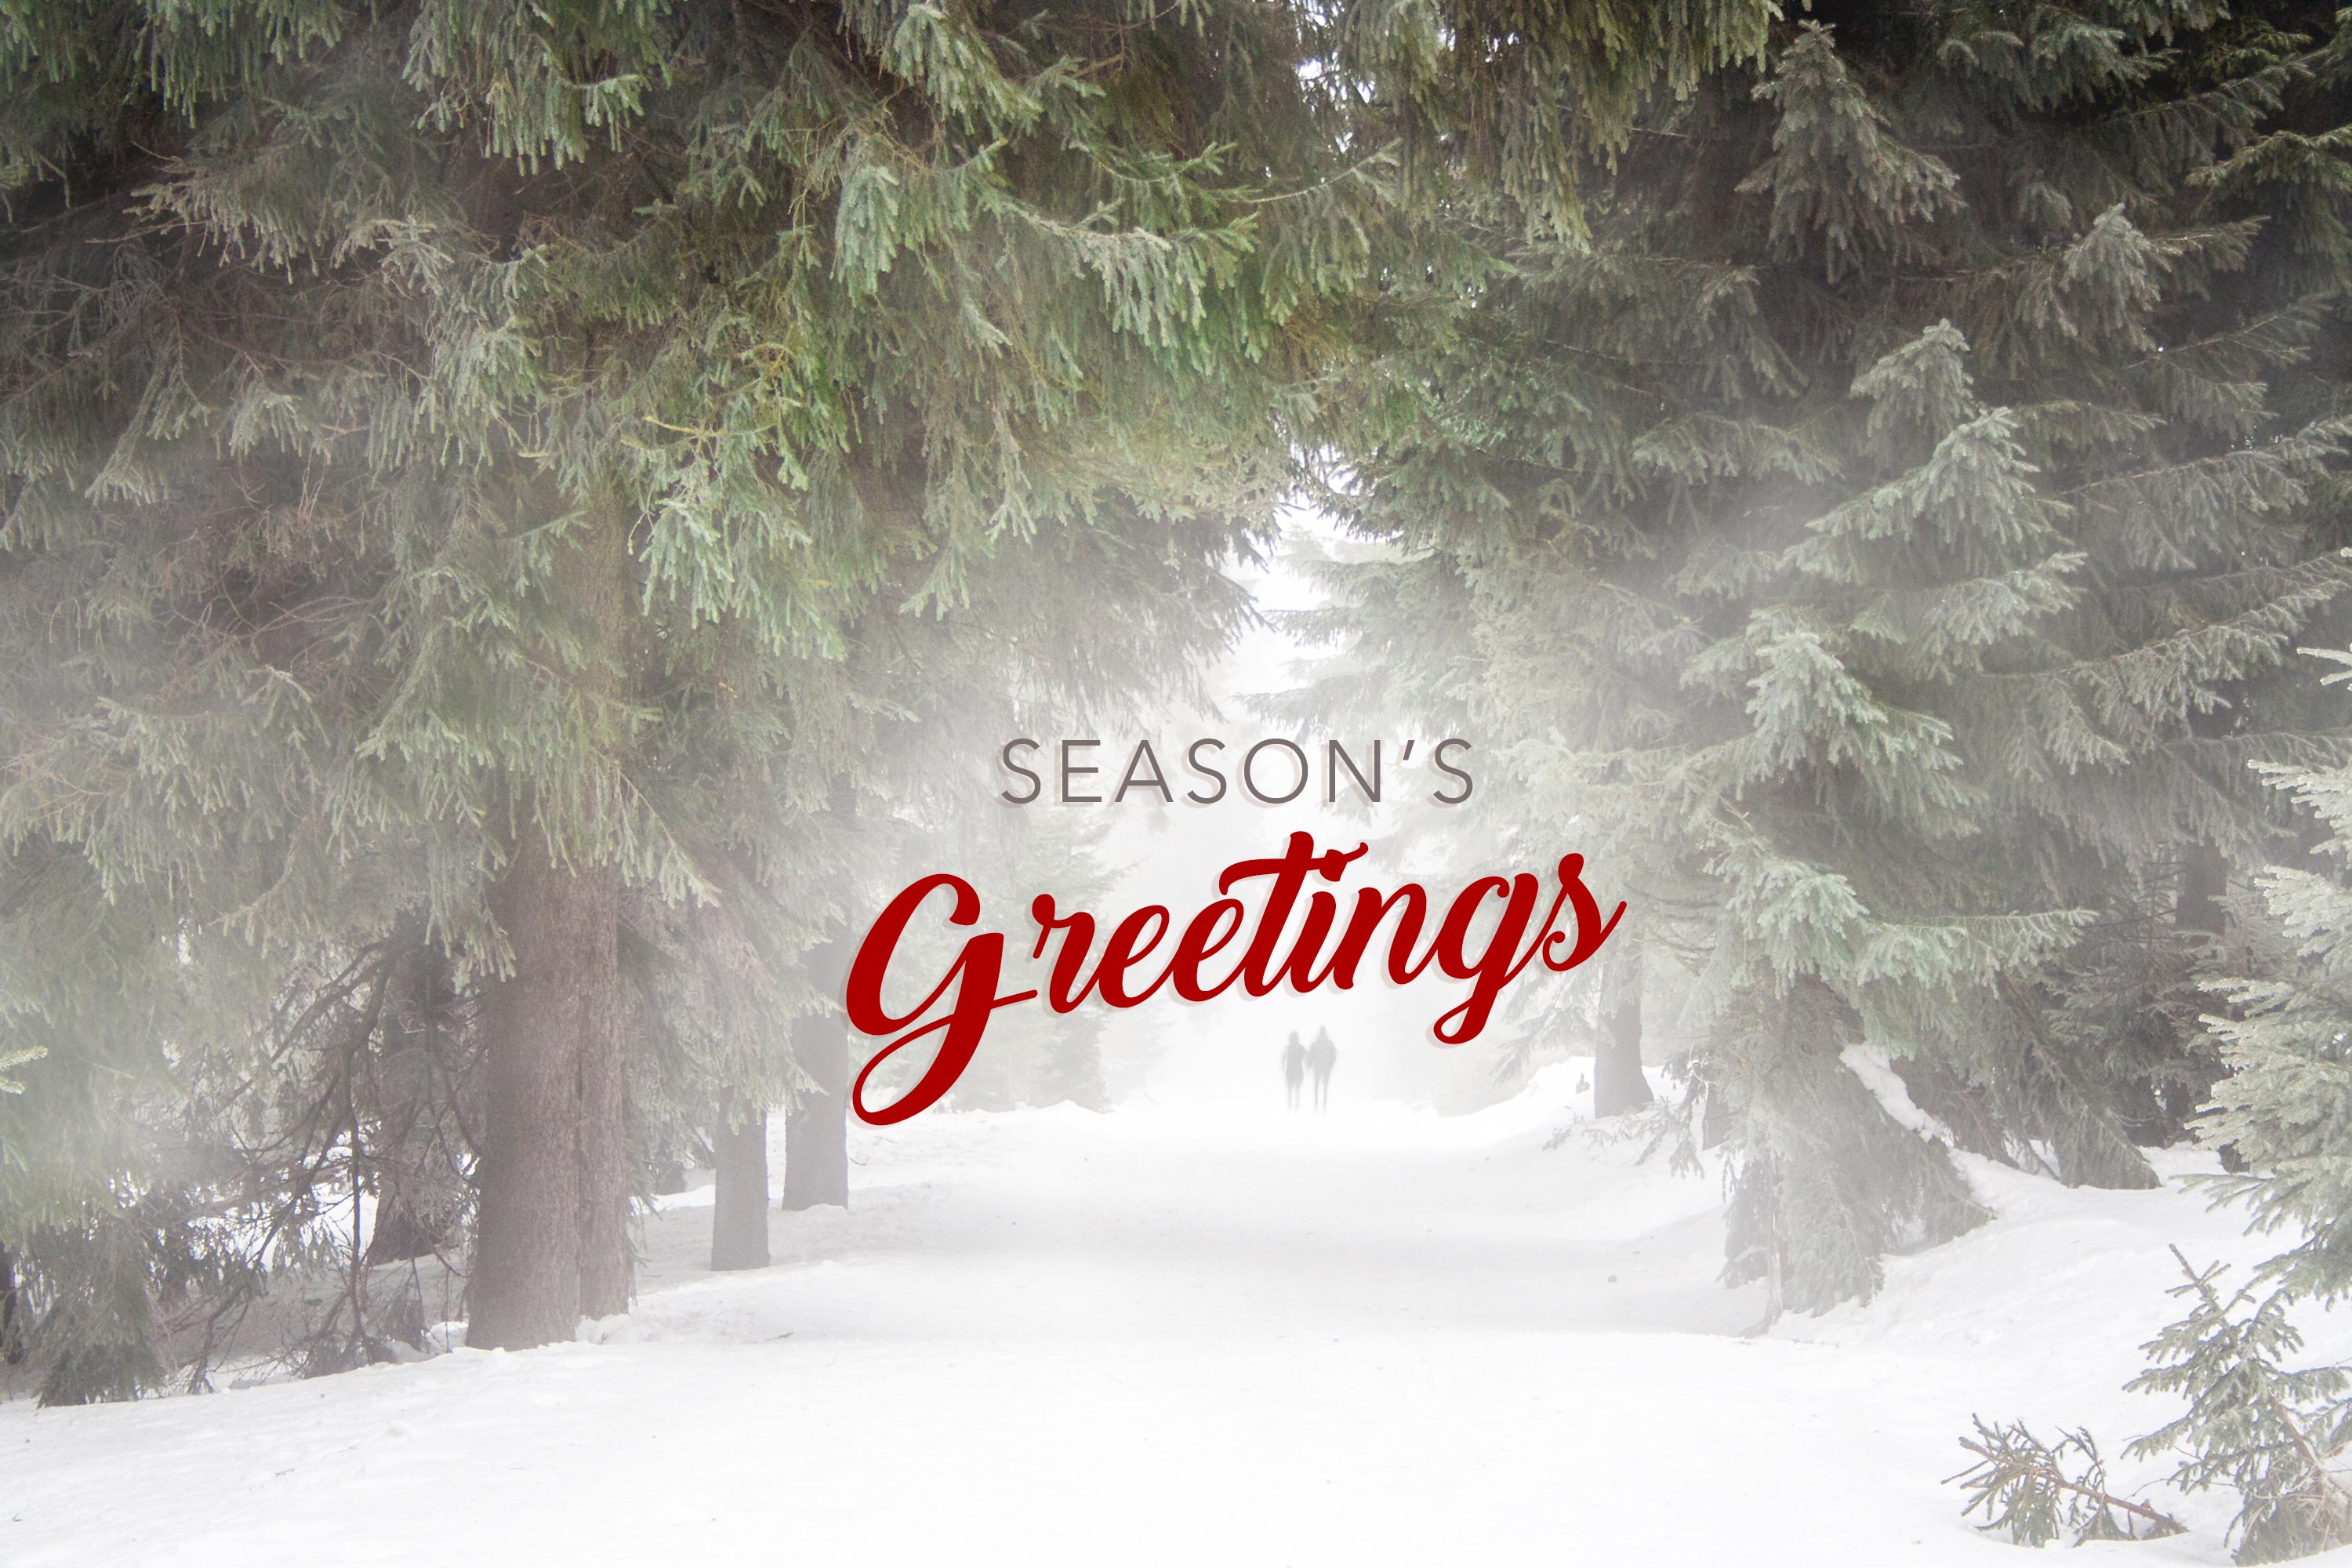 Free download 15 Seasons Greetings Cards Stock Images HD 3000x2000